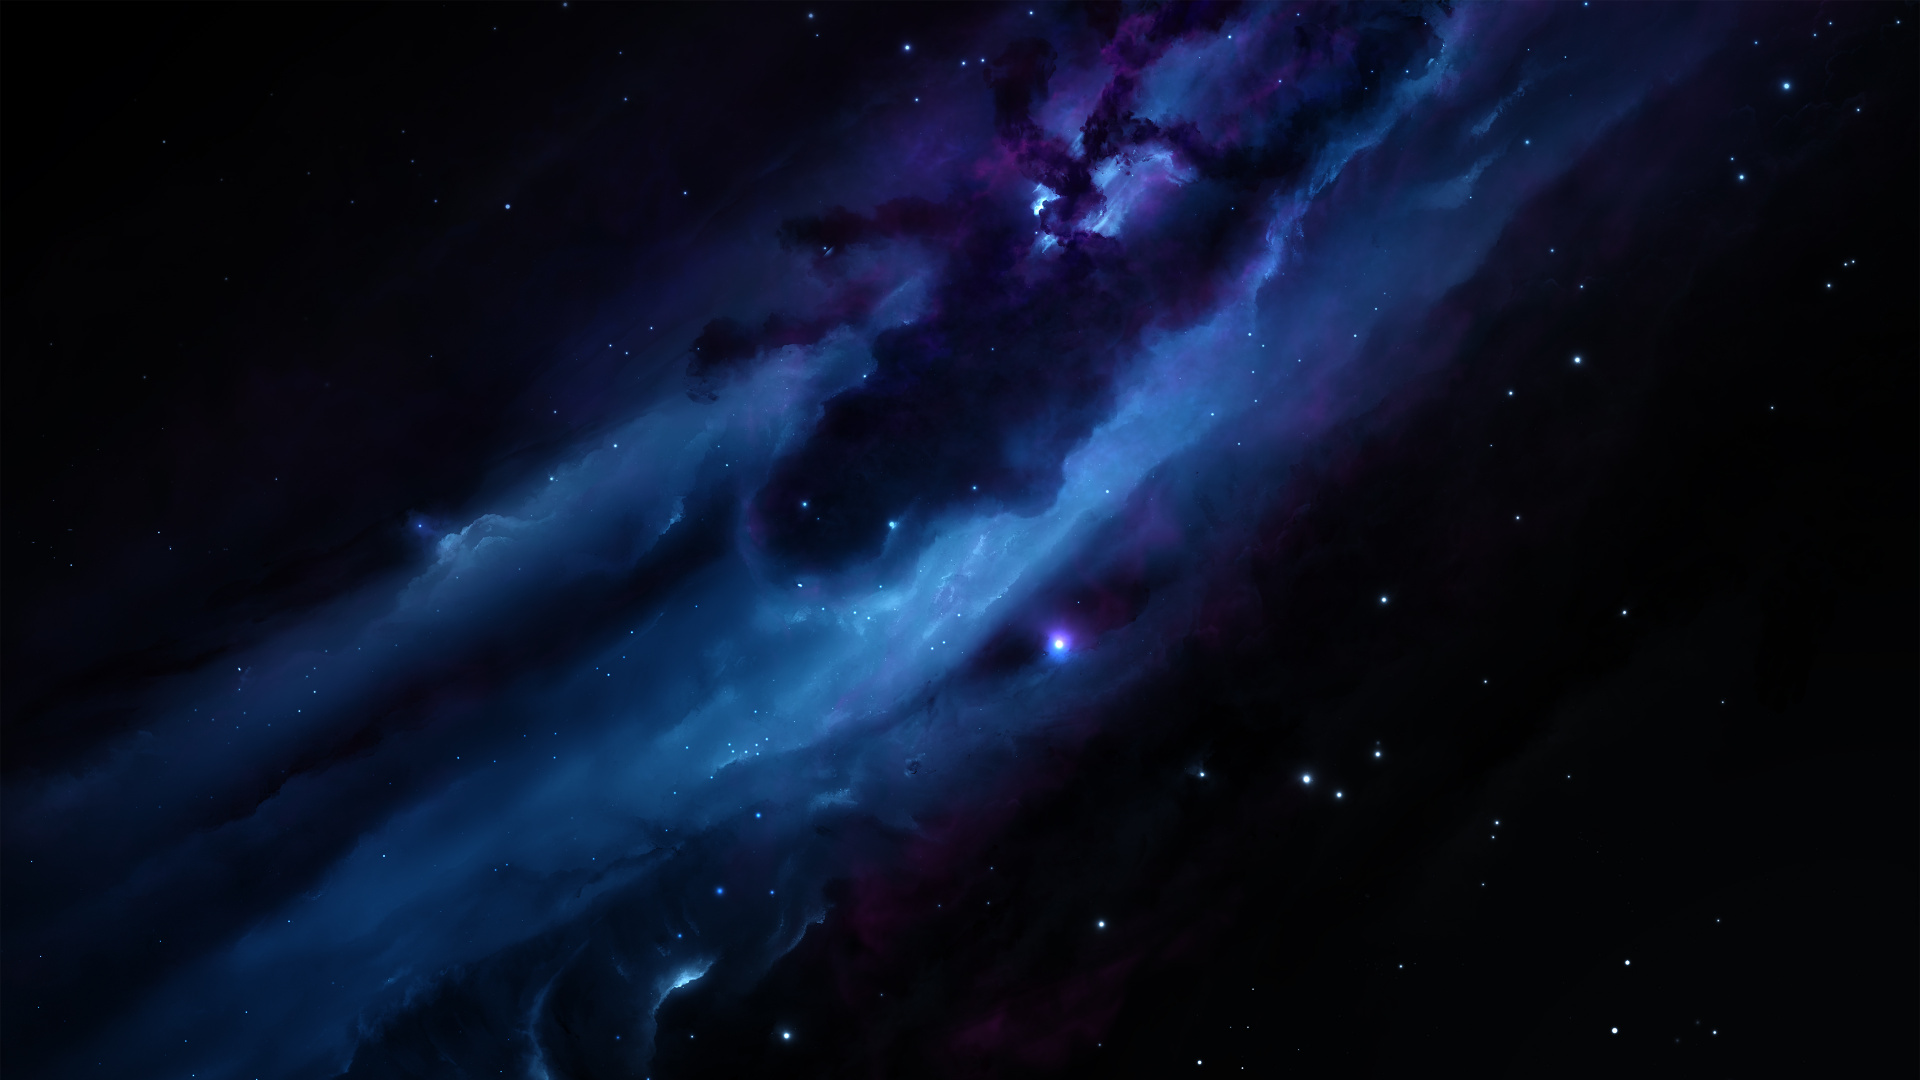 Purple and White Galaxy Illustration. Wallpaper in 1920x1080 Resolution